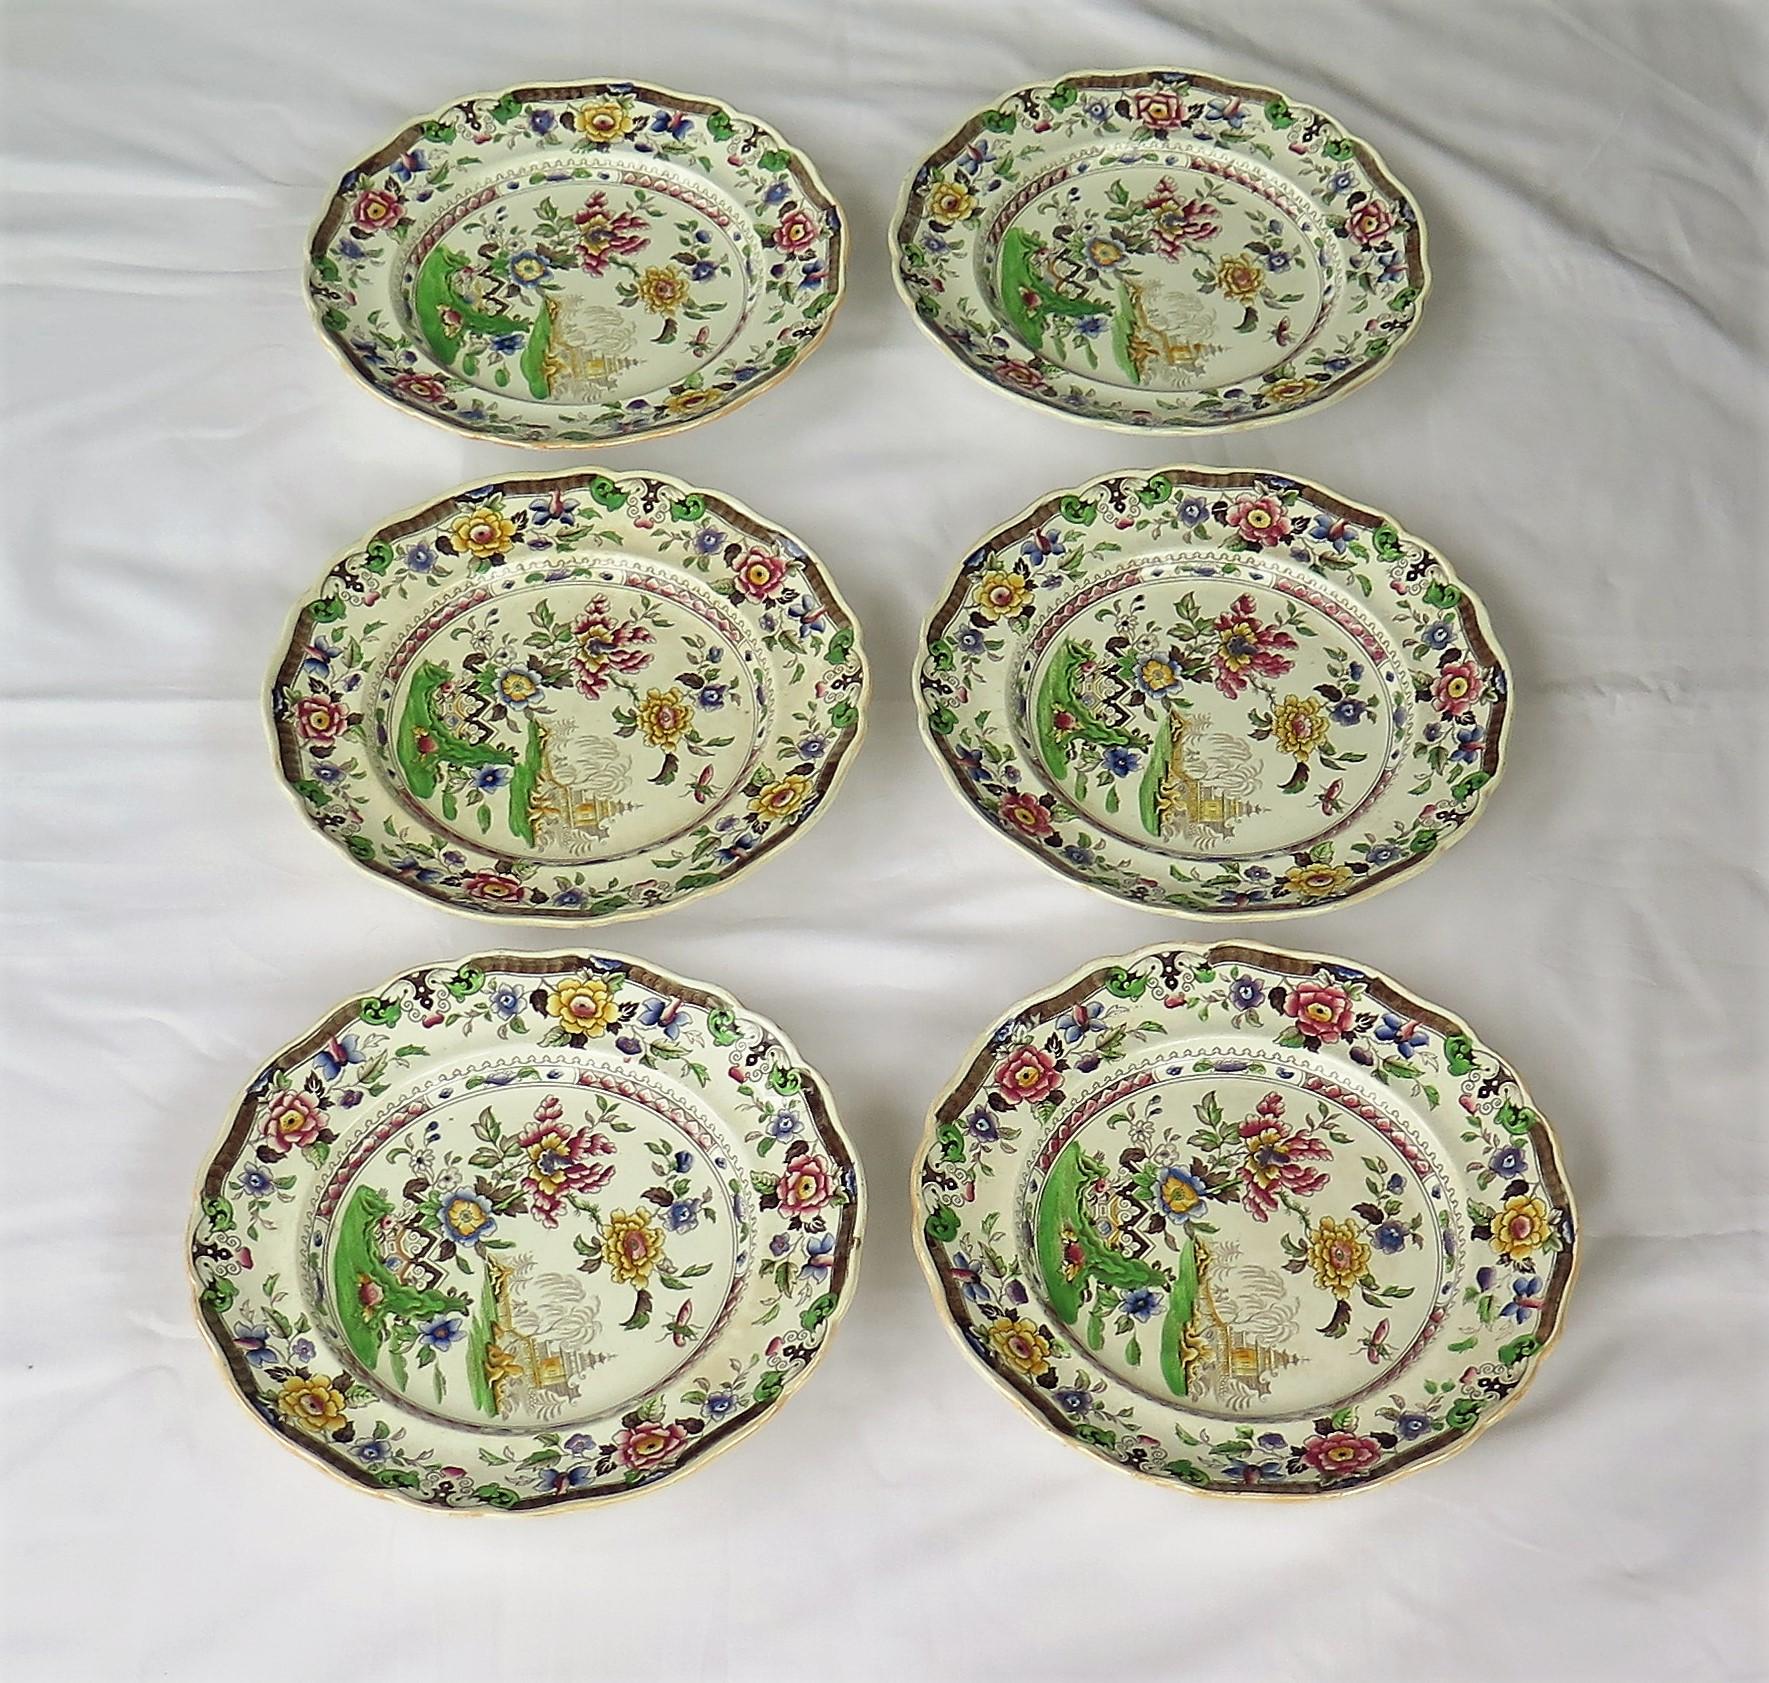 English SIX Large Pottery Dinner Plates by Zachariah Boyle Chinese Flora Ptn, circa 1825